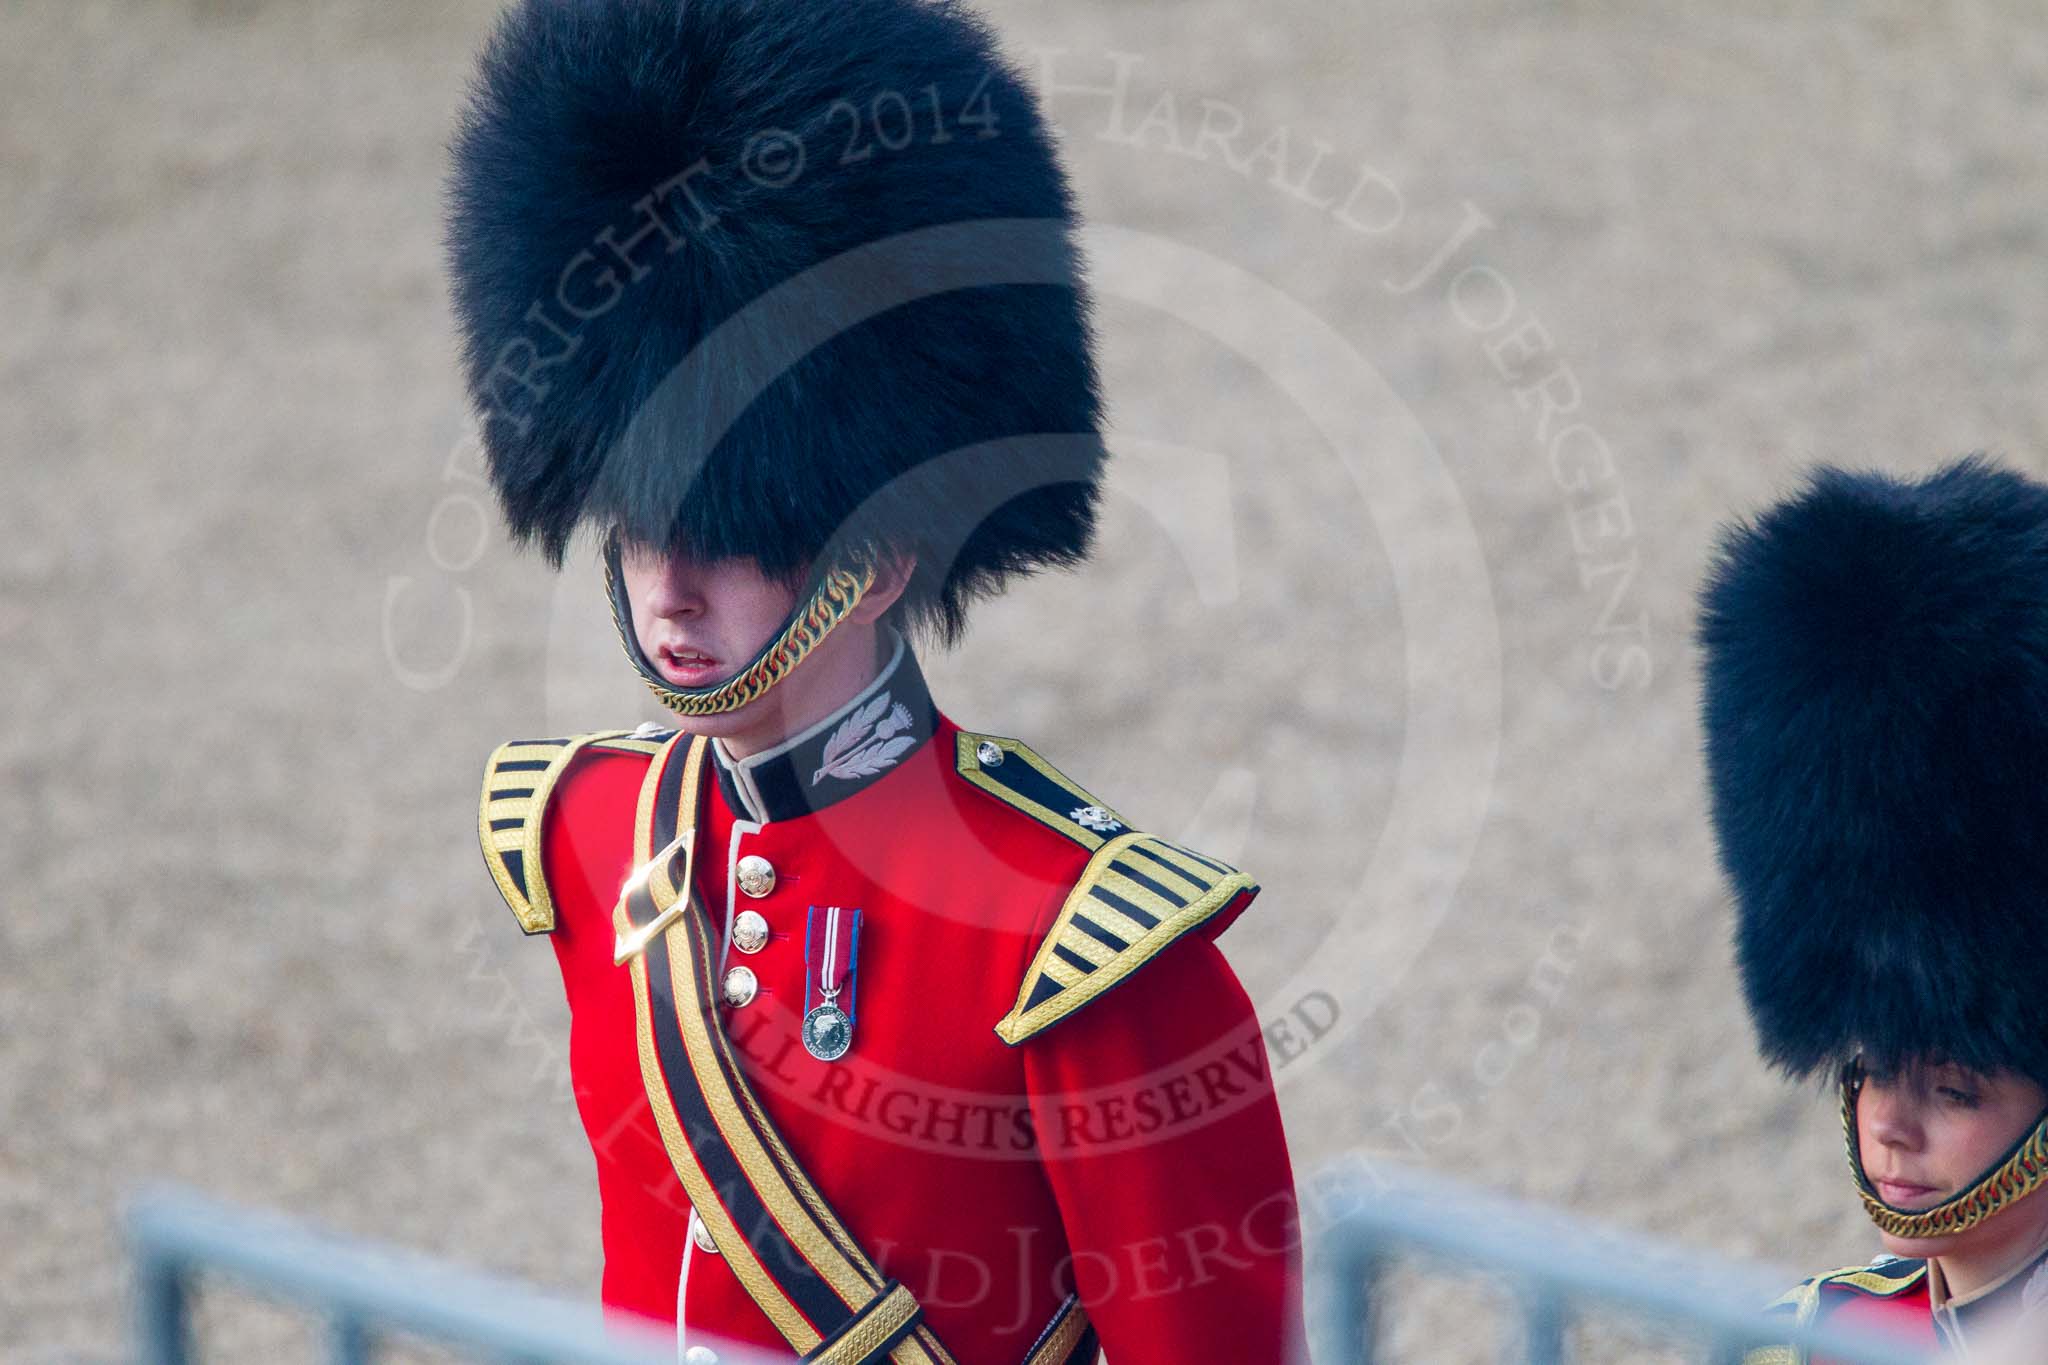 Beating Retreat 2014.
Horse Guards Parade, Westminster,
London SW1A,

United Kingdom,
on 11 June 2014 at 20:35, image #131